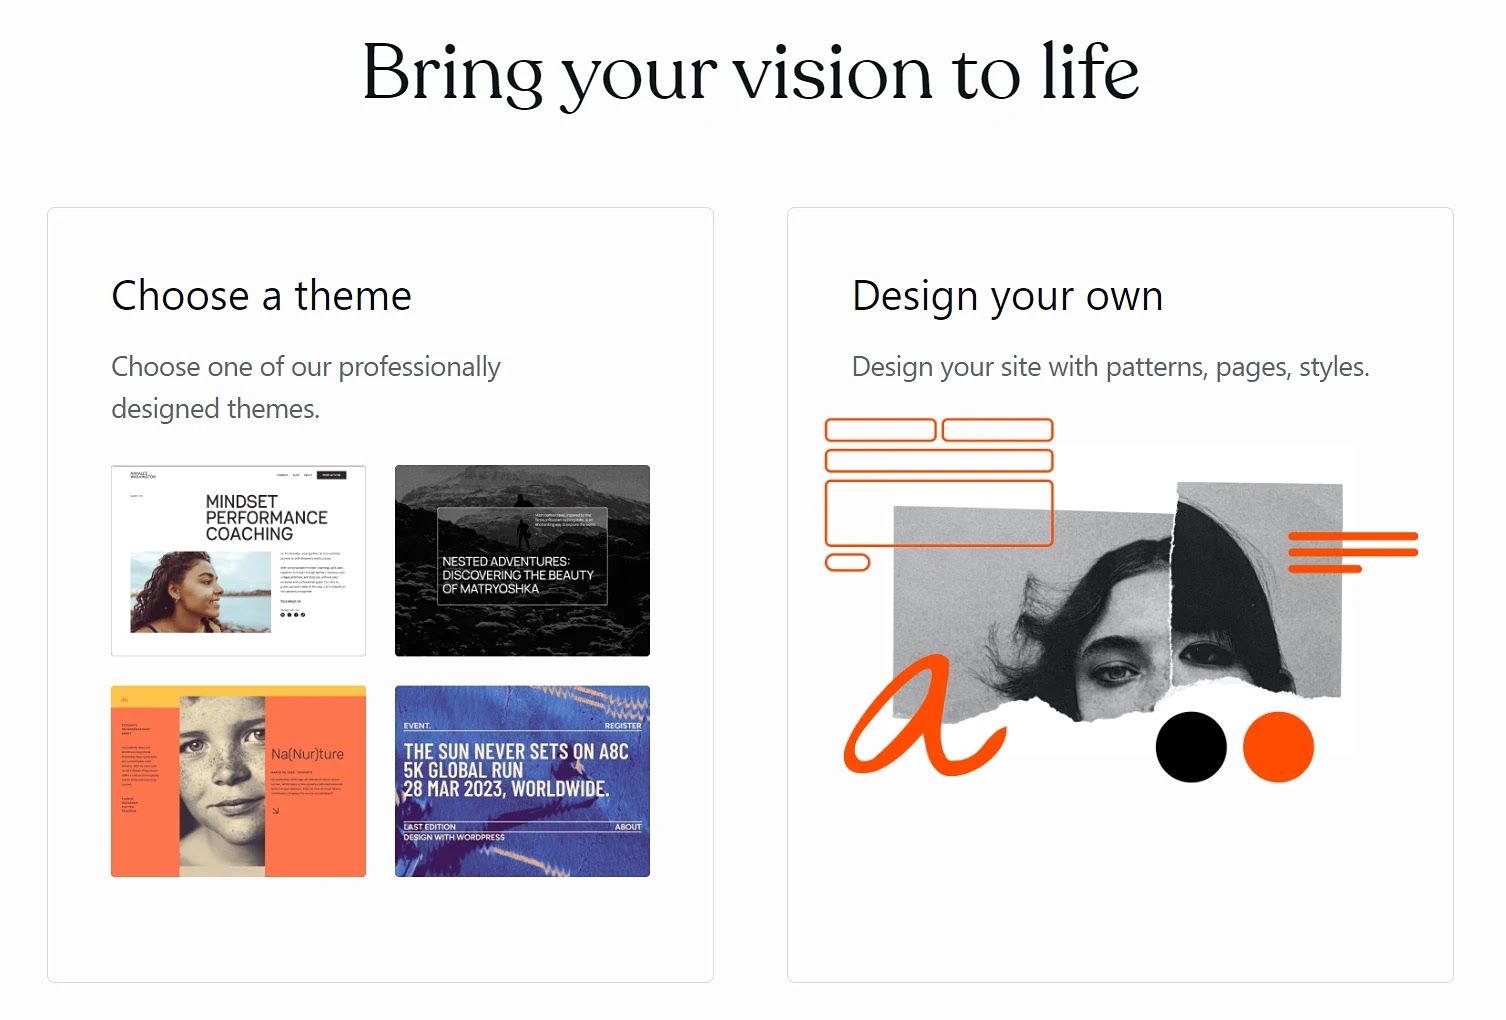 WordPress lets you pick a pre-designed theme or start from scratch